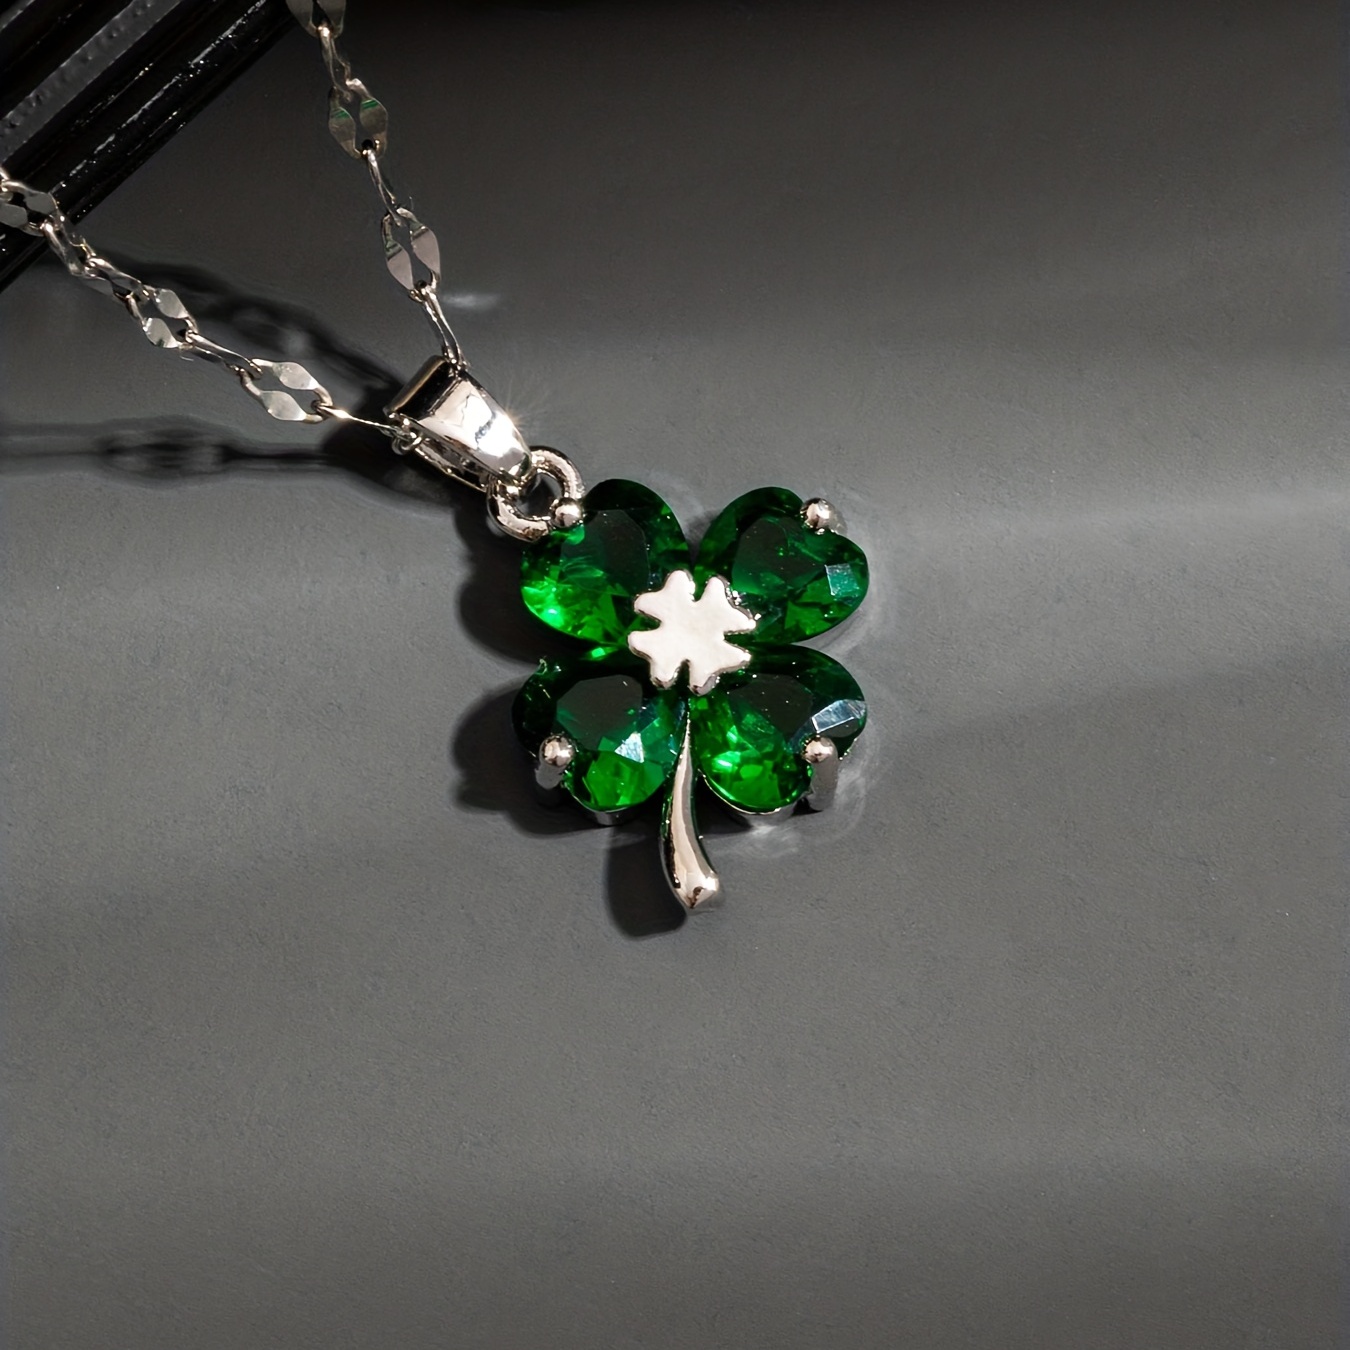 New Stainless Steel Necklaces Zircon Shell Four-leaf Clover Double